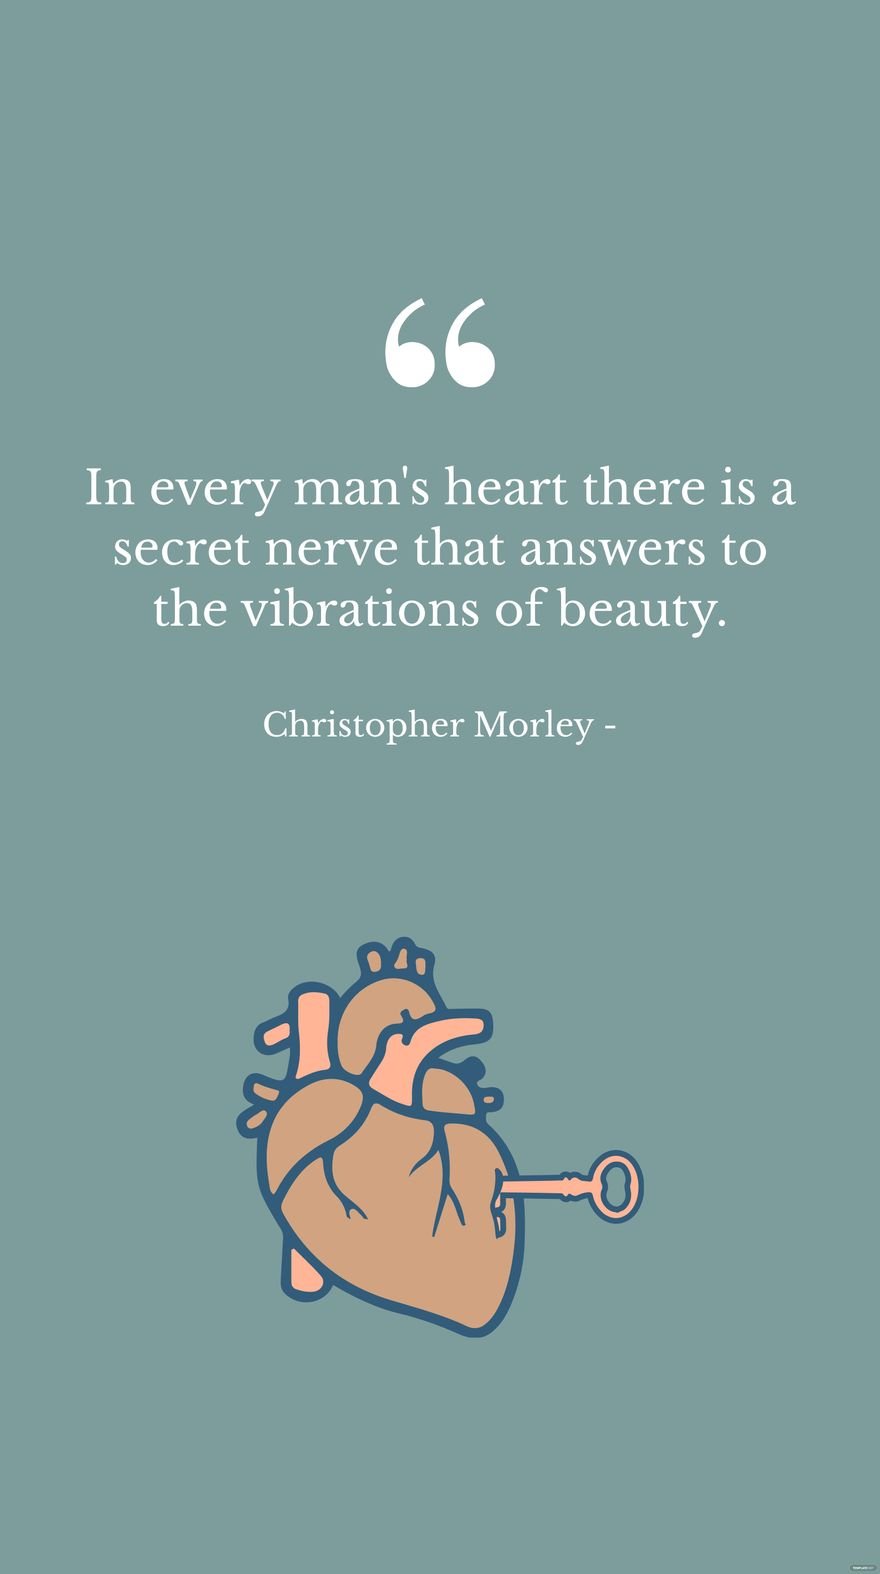 Free Christopher Morley - In every man's heart there is a secret nerve that answers to the vibrations of beauty. in JPG